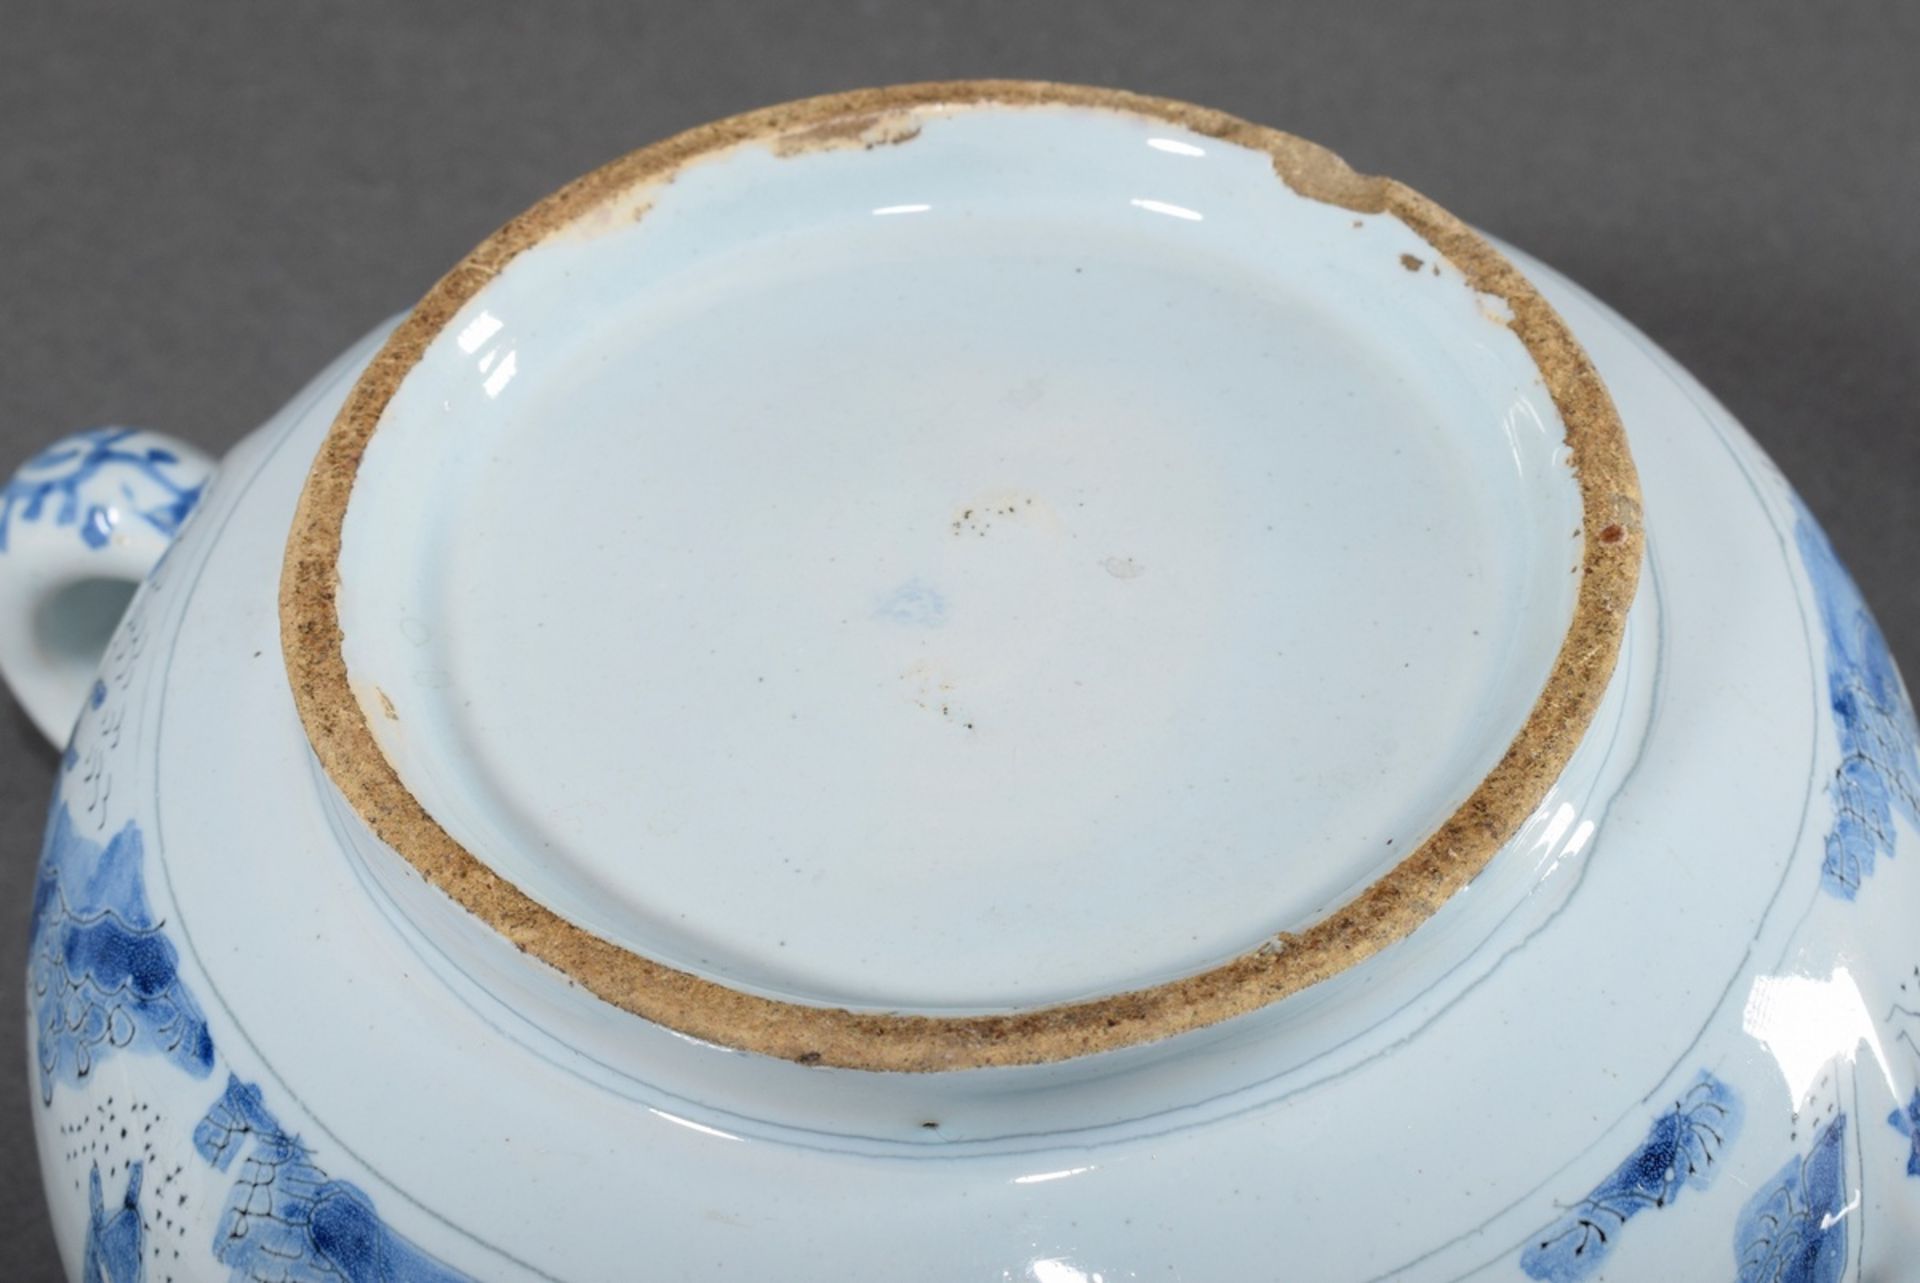 Faience shaving bowl with strainer insert for brush/soap and side handles, fine blue painting decor - Image 4 of 5